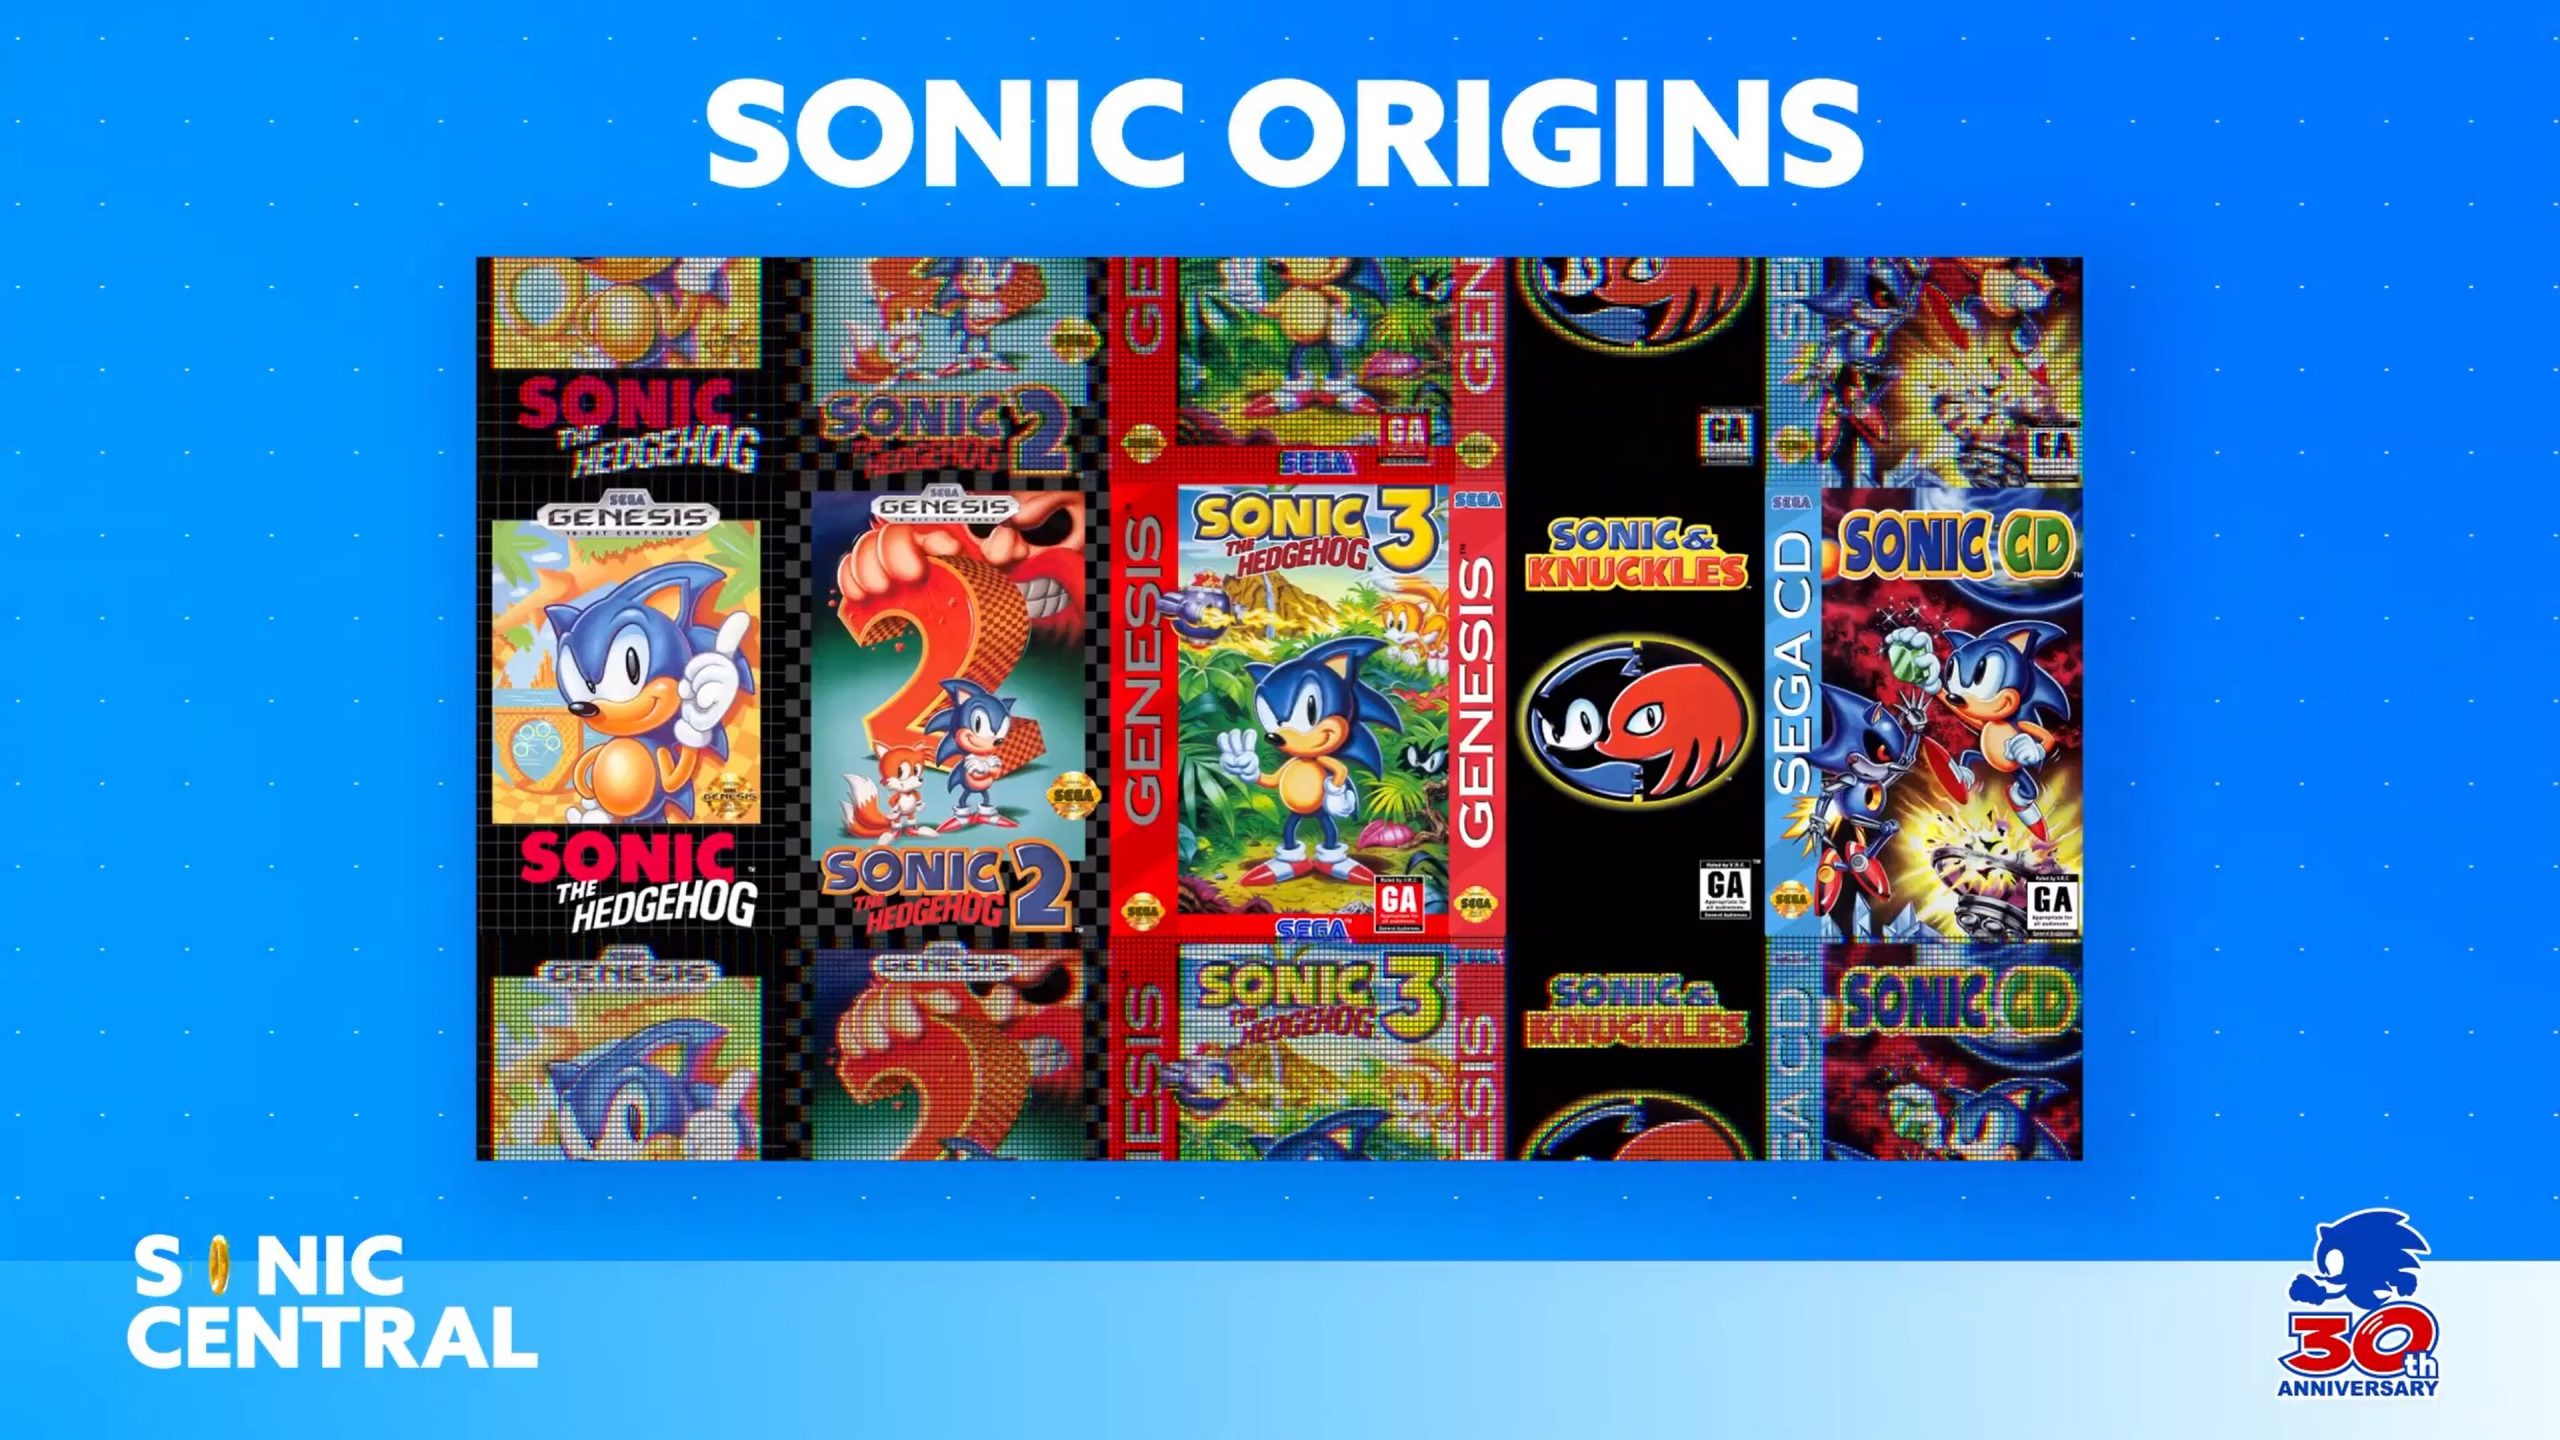 Play Sonic and Knuckles & Sonic 3 Online - Sega Genesis Classic